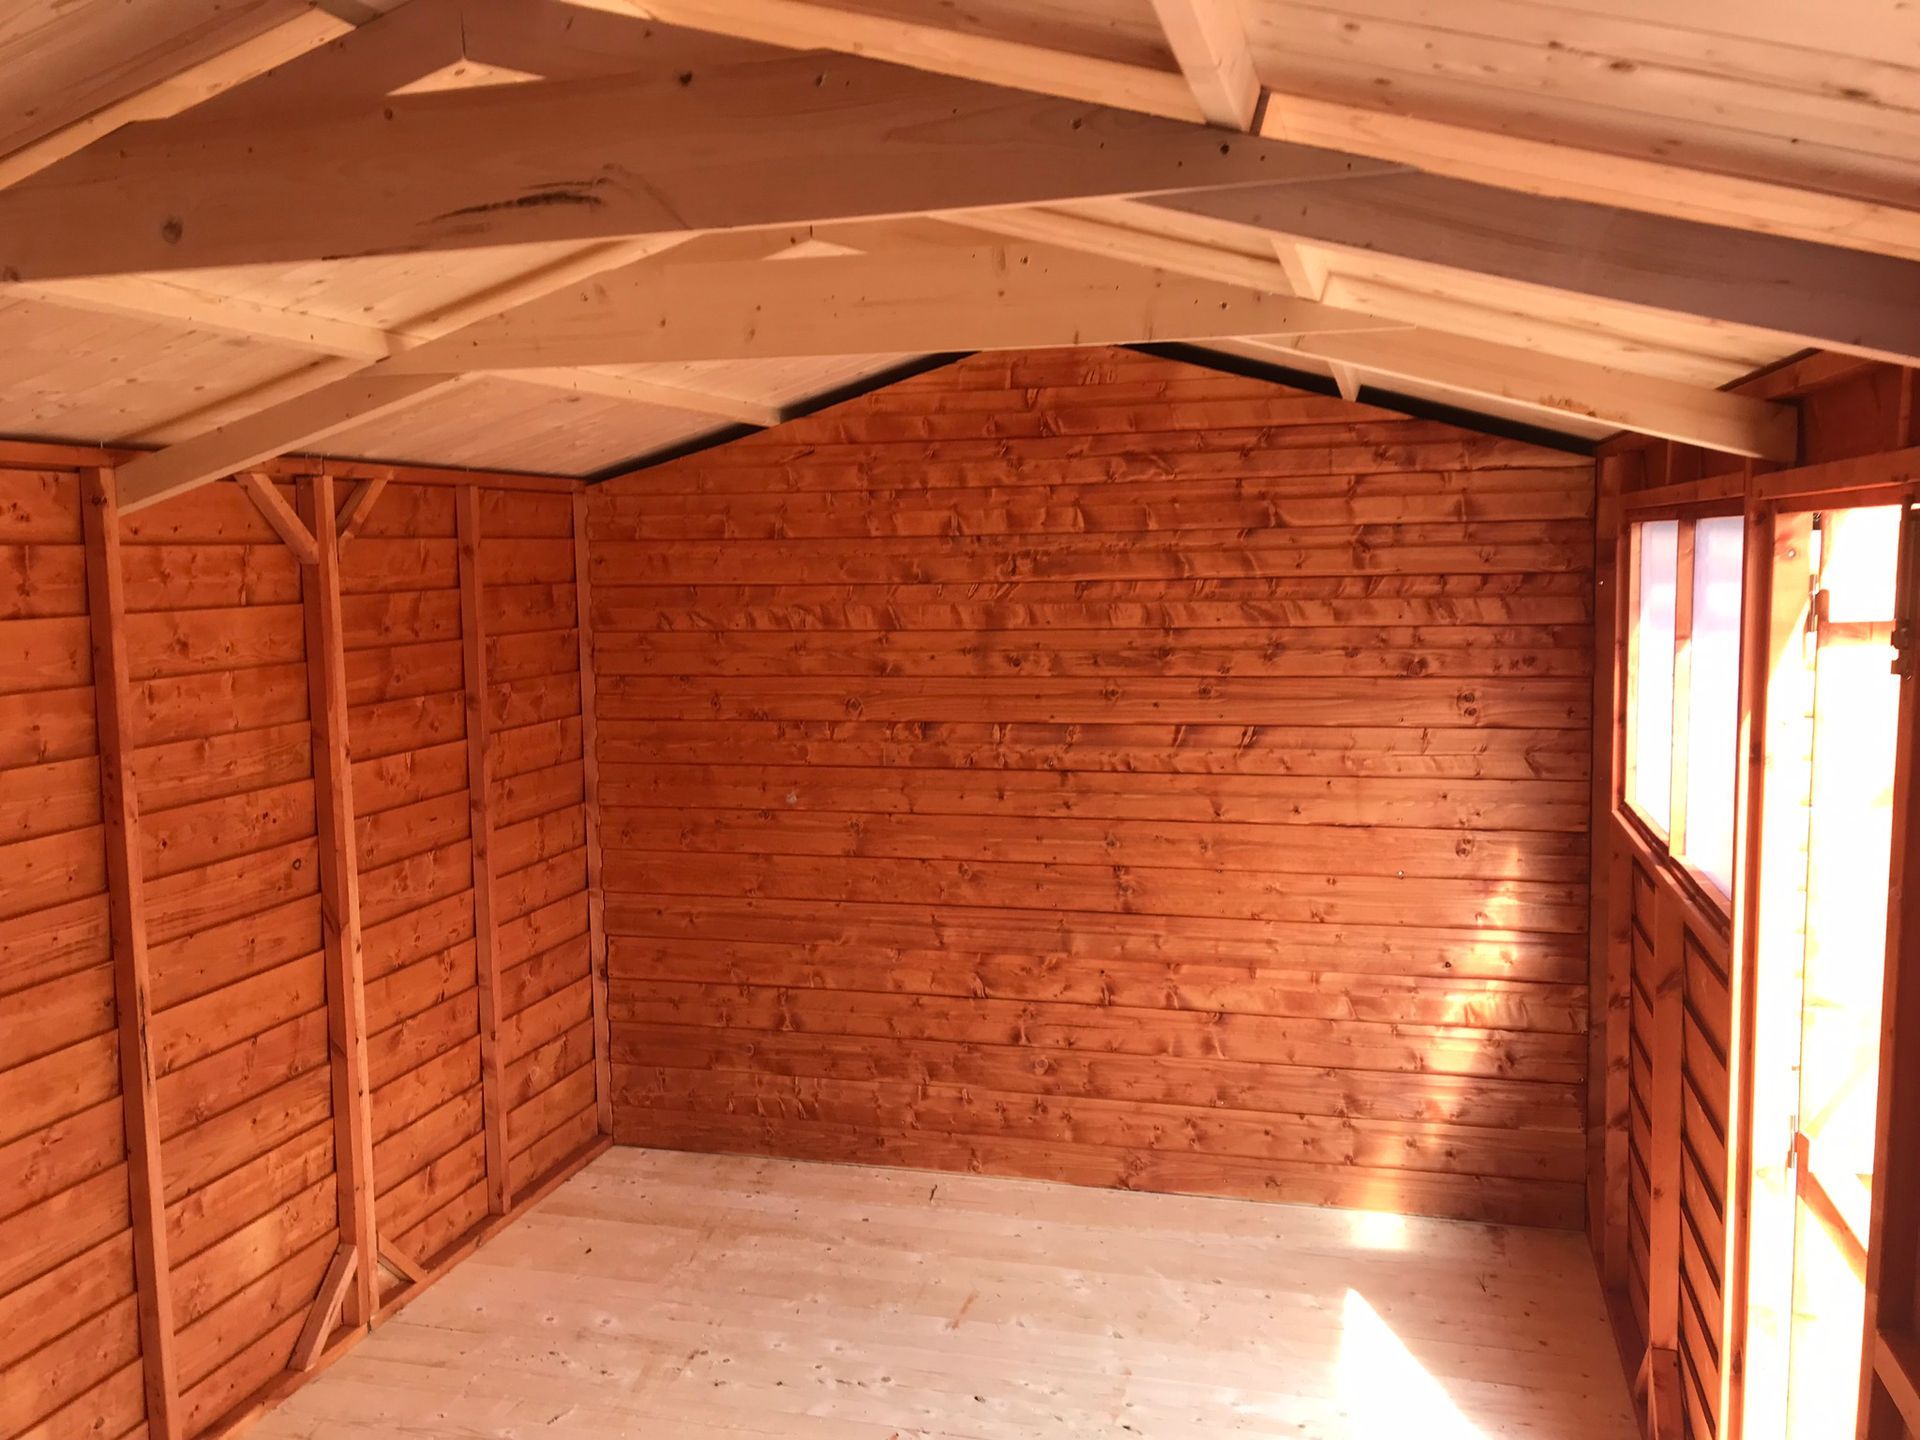 Photo of the inside of a shed showing an internal divider